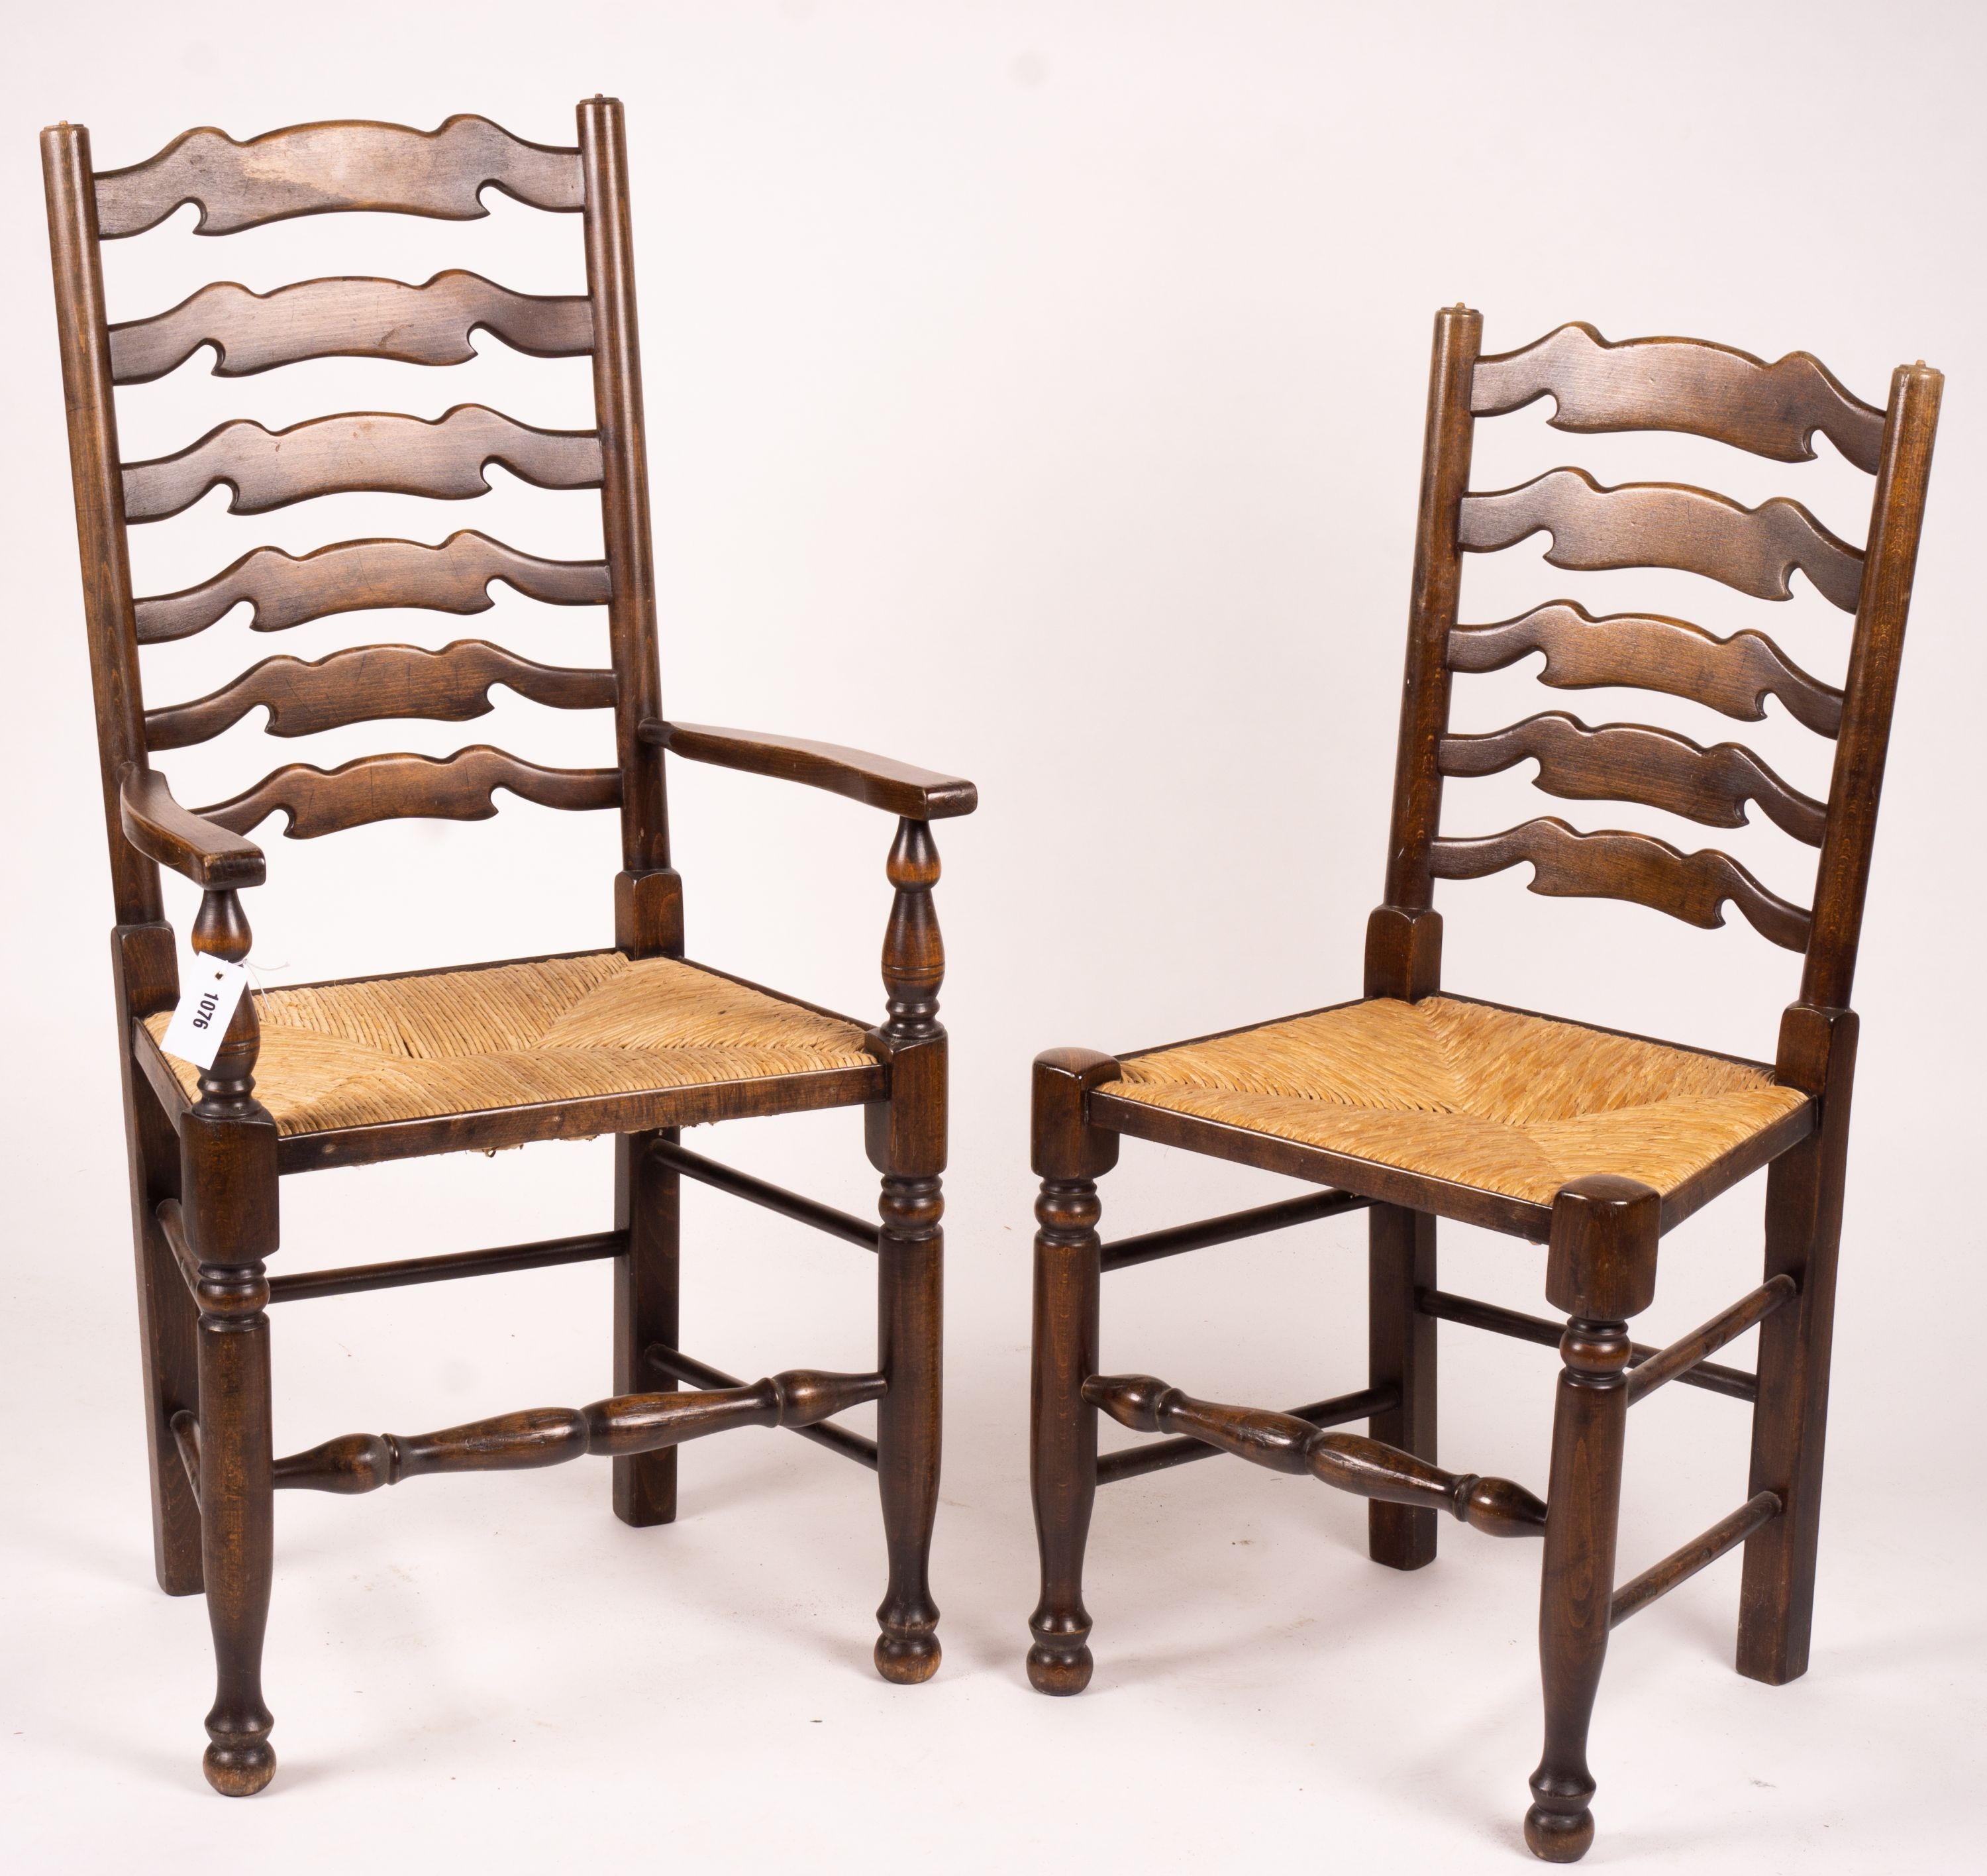 A set of ten 18th century style beech ladderback rush seat dining chairs, two with arms